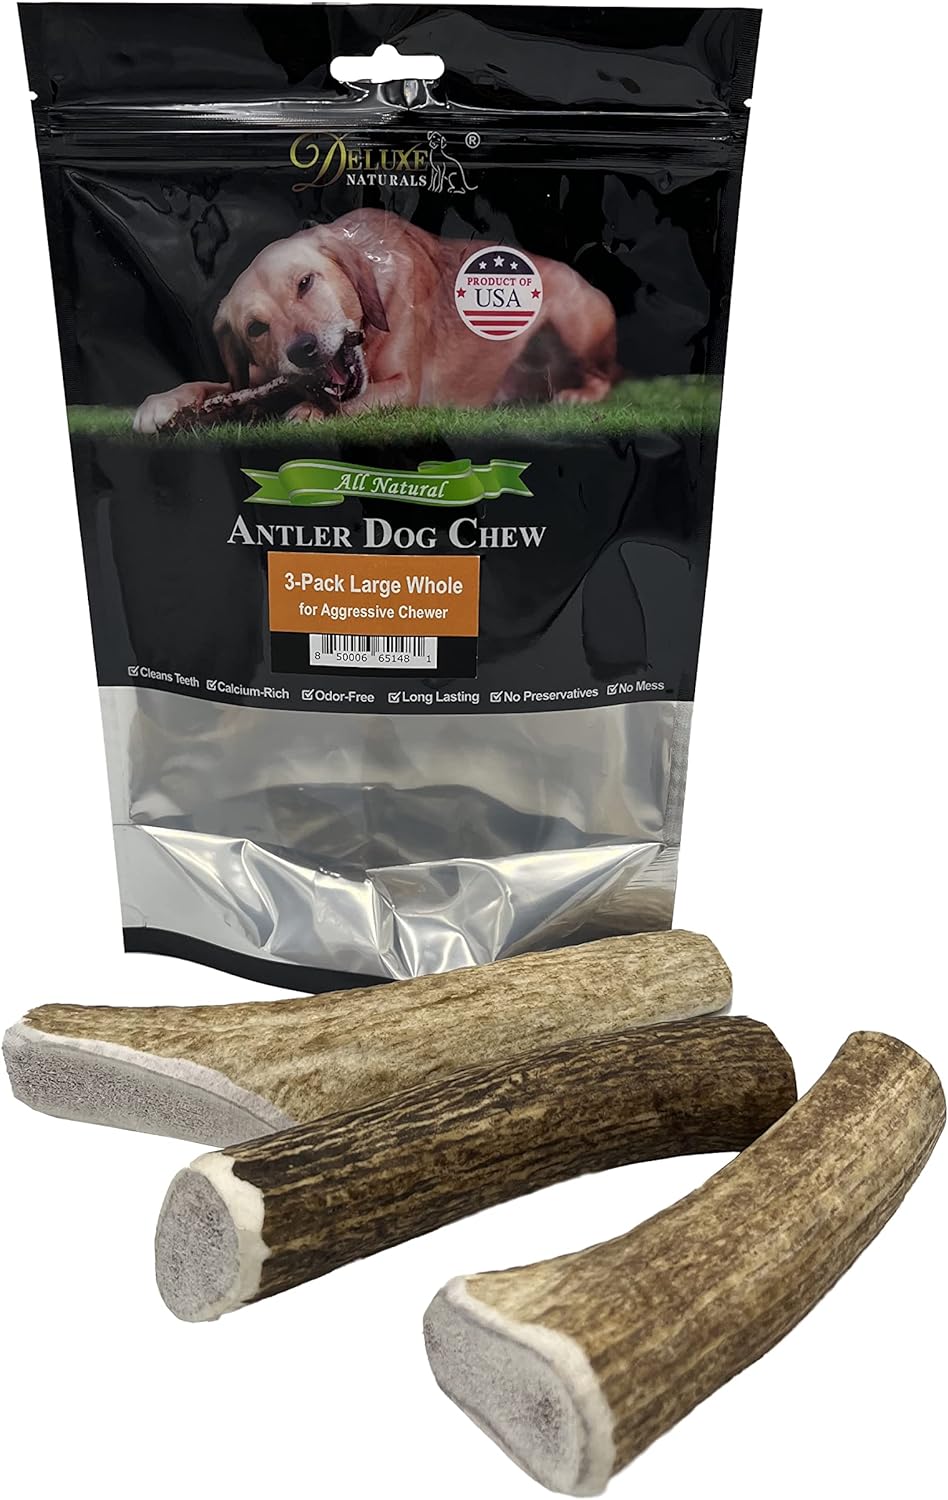 Elk Antler Chews for Dogs | Naturally Shed USA Collected Elk Antlers | All Natural A-Grade Premium Elk Antler Dog Chews | Product of USA, 3-Pack Large Whole